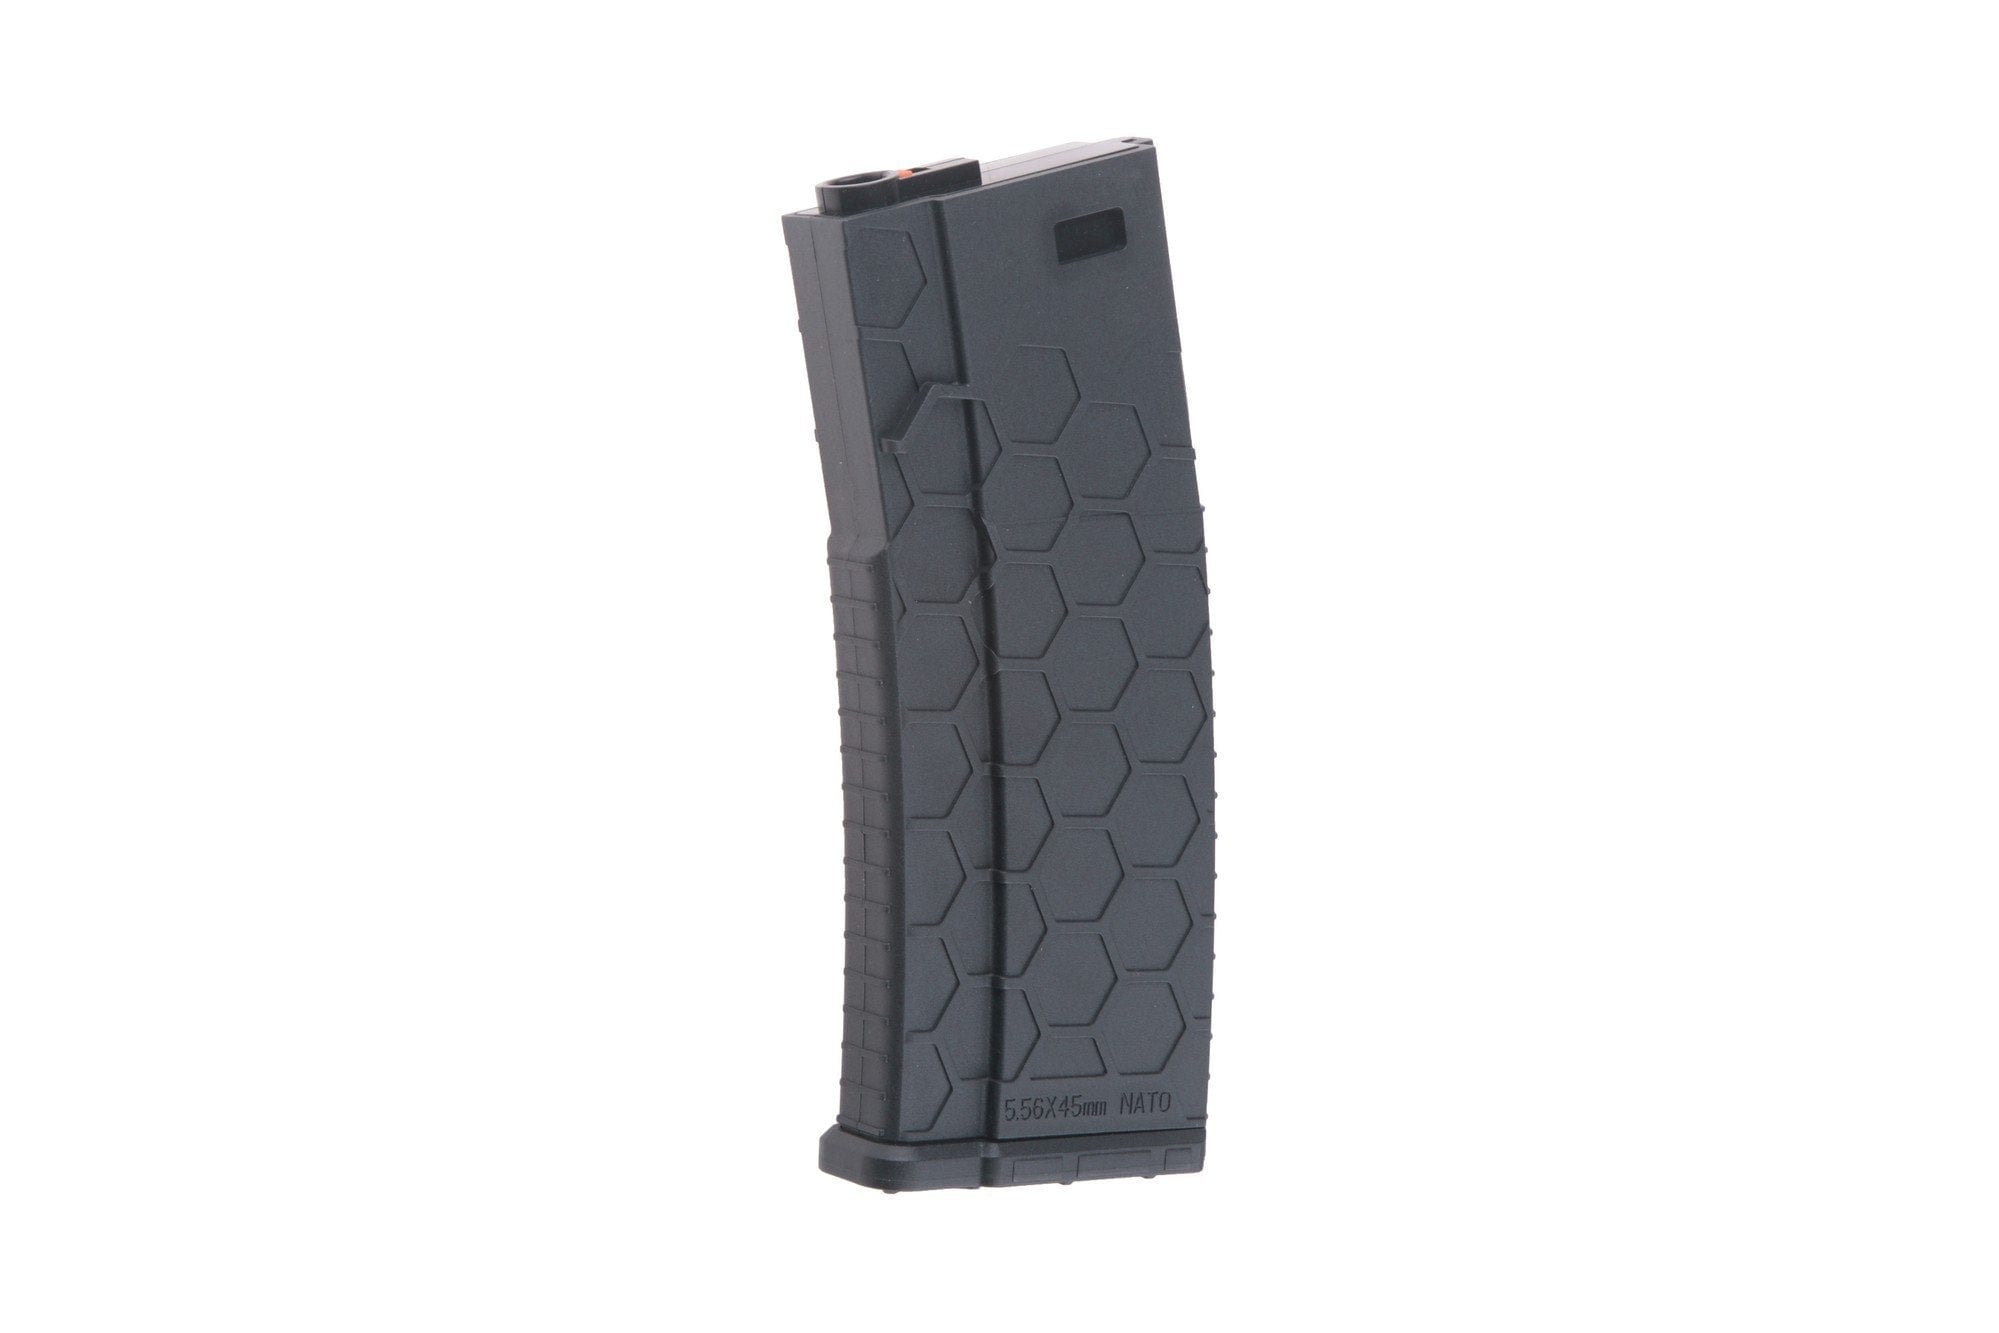 100BBs mid-cap HEX type magazine for M4/M16 by SHS on Airsoft Mania Europe